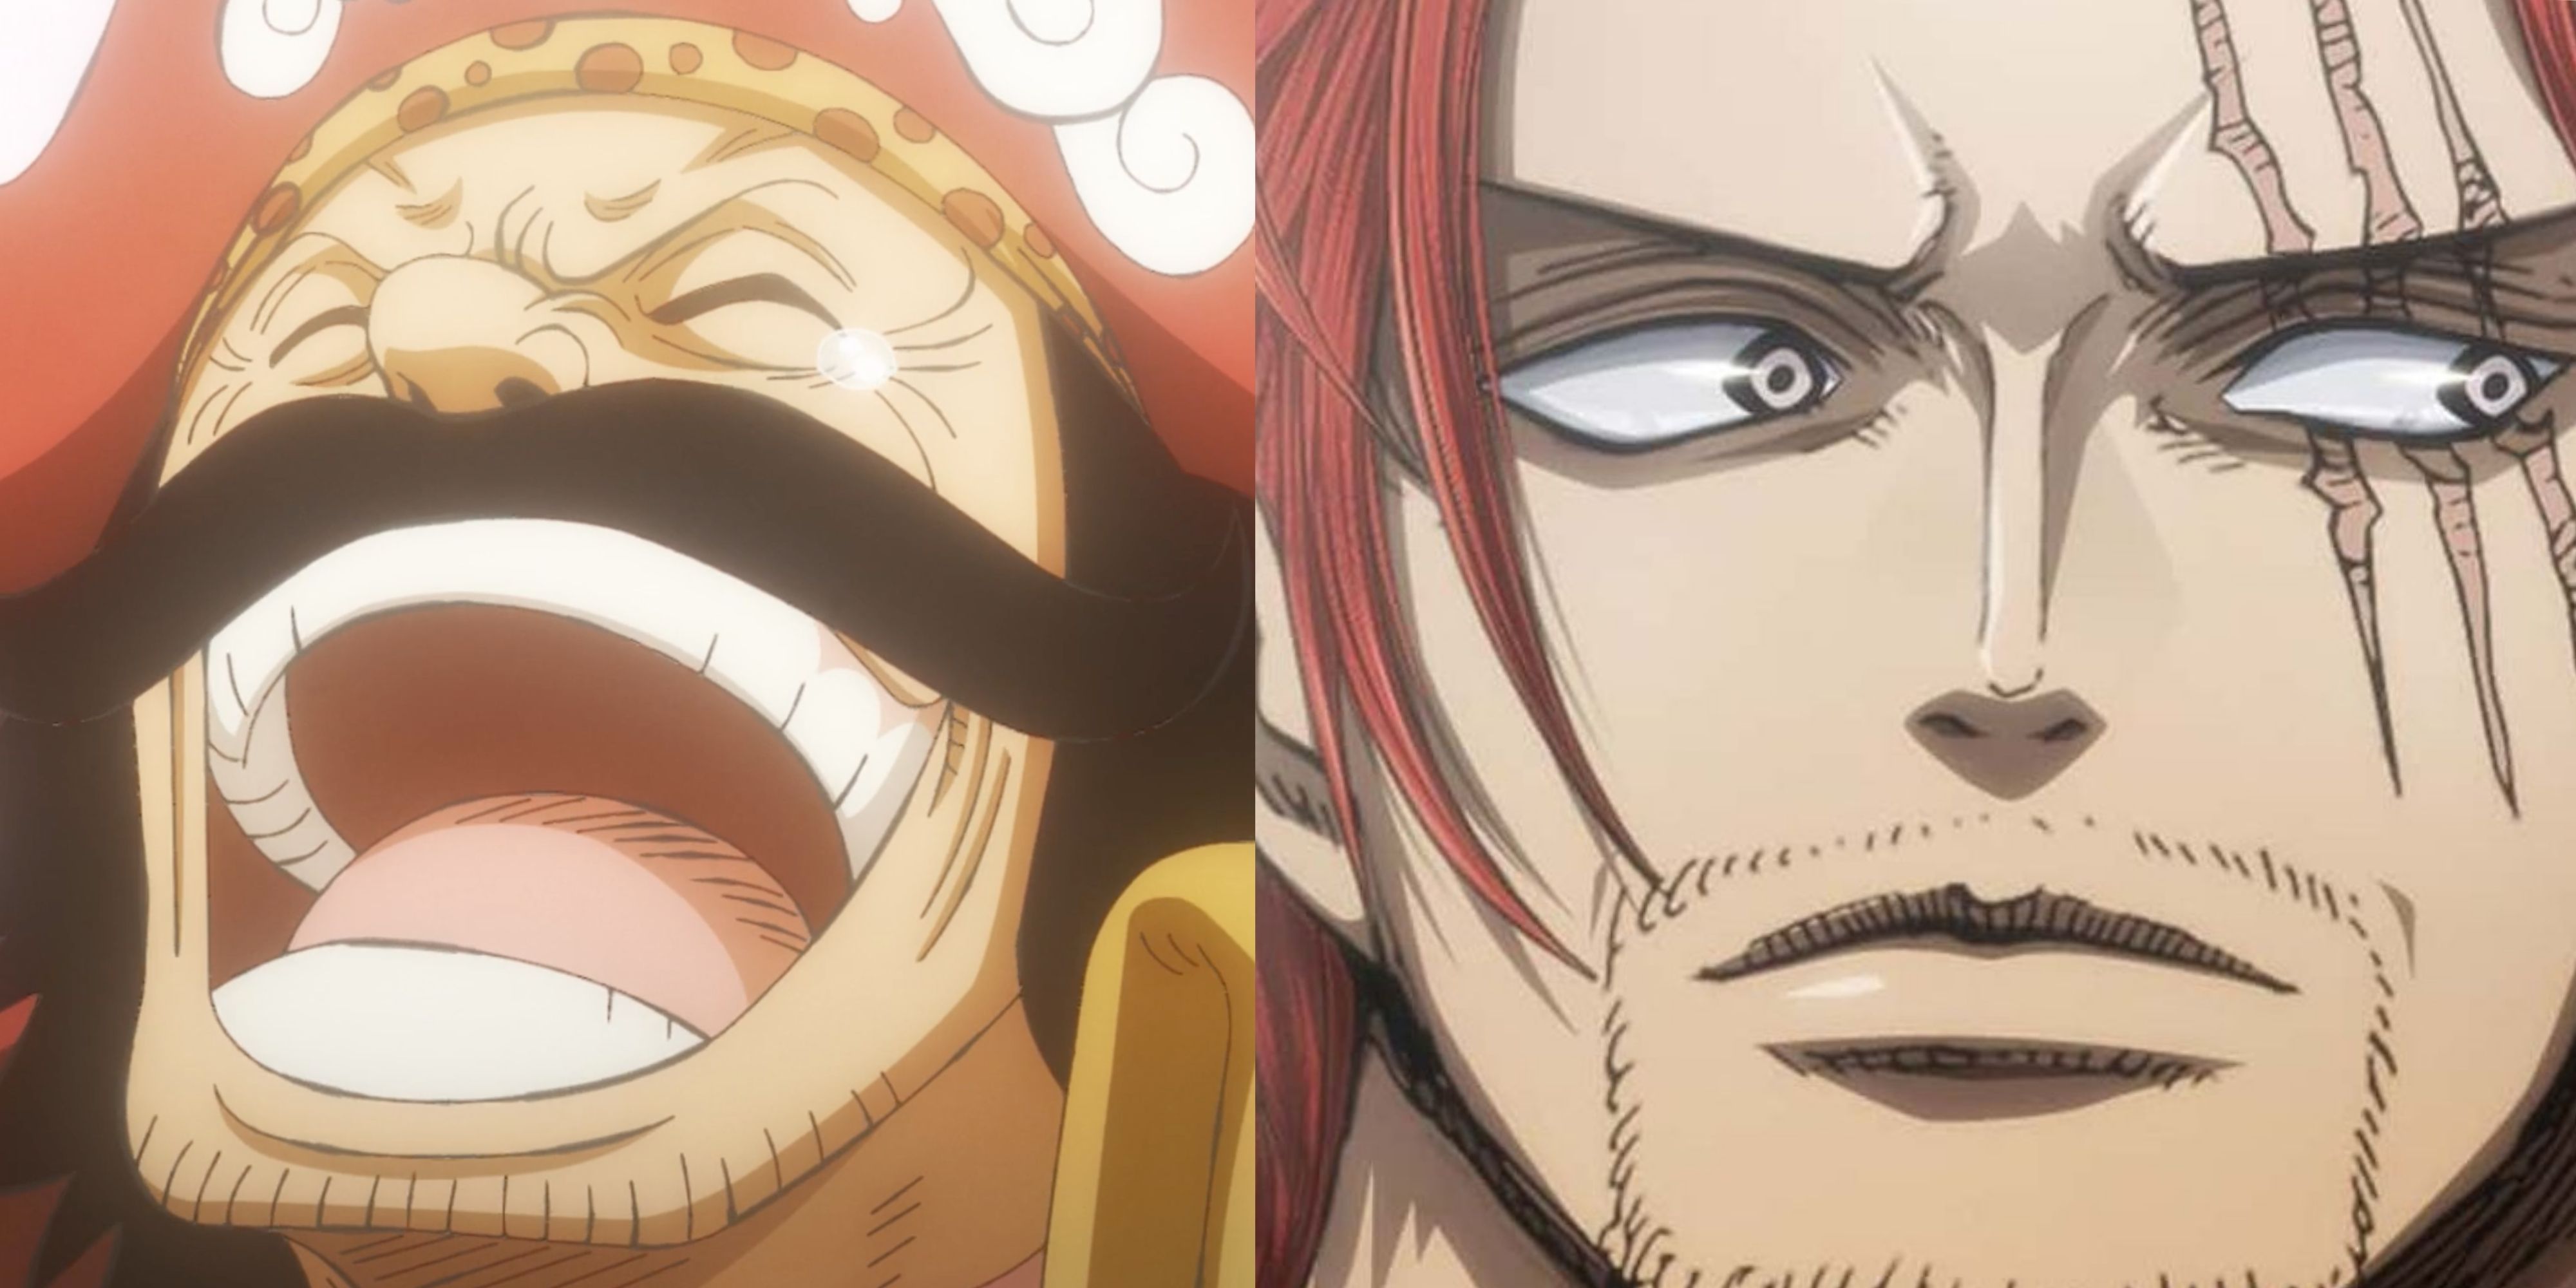 Featured One Piece Closest To Laugh Tale Shanks Roger